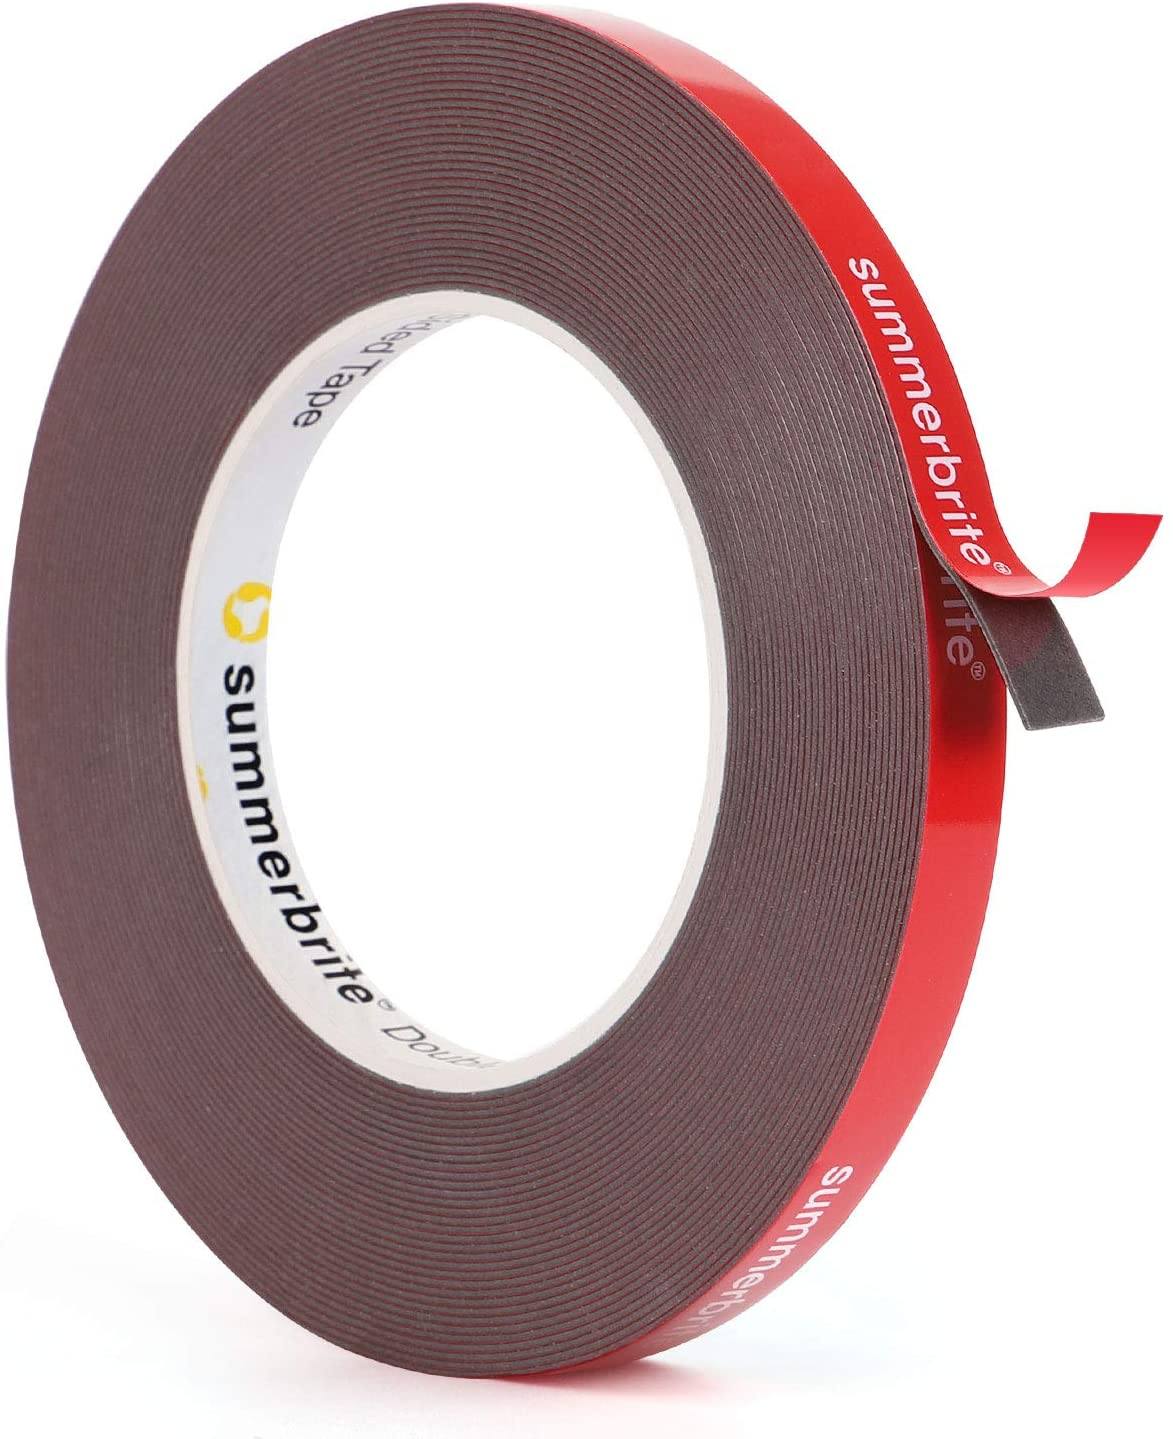 3 M VHB Double Sided Tape Heavy Duty Mounting Transparent Heat